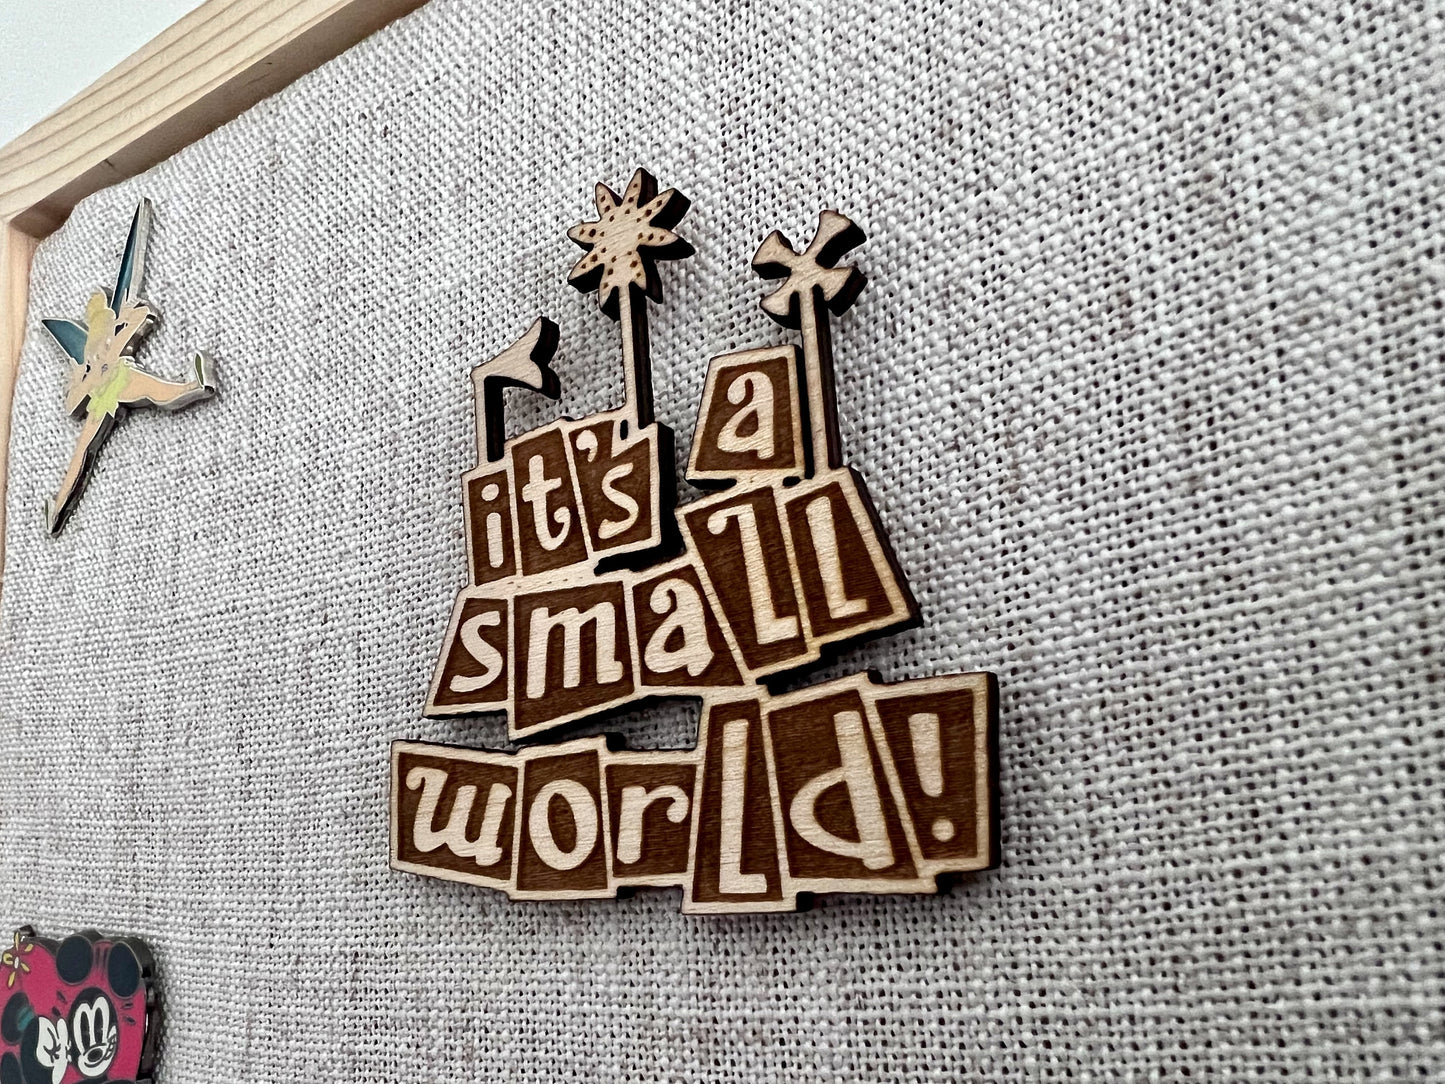 Pin Trading Board Small World, perfect for Pin Traders to display those Disney hidden mickey pins